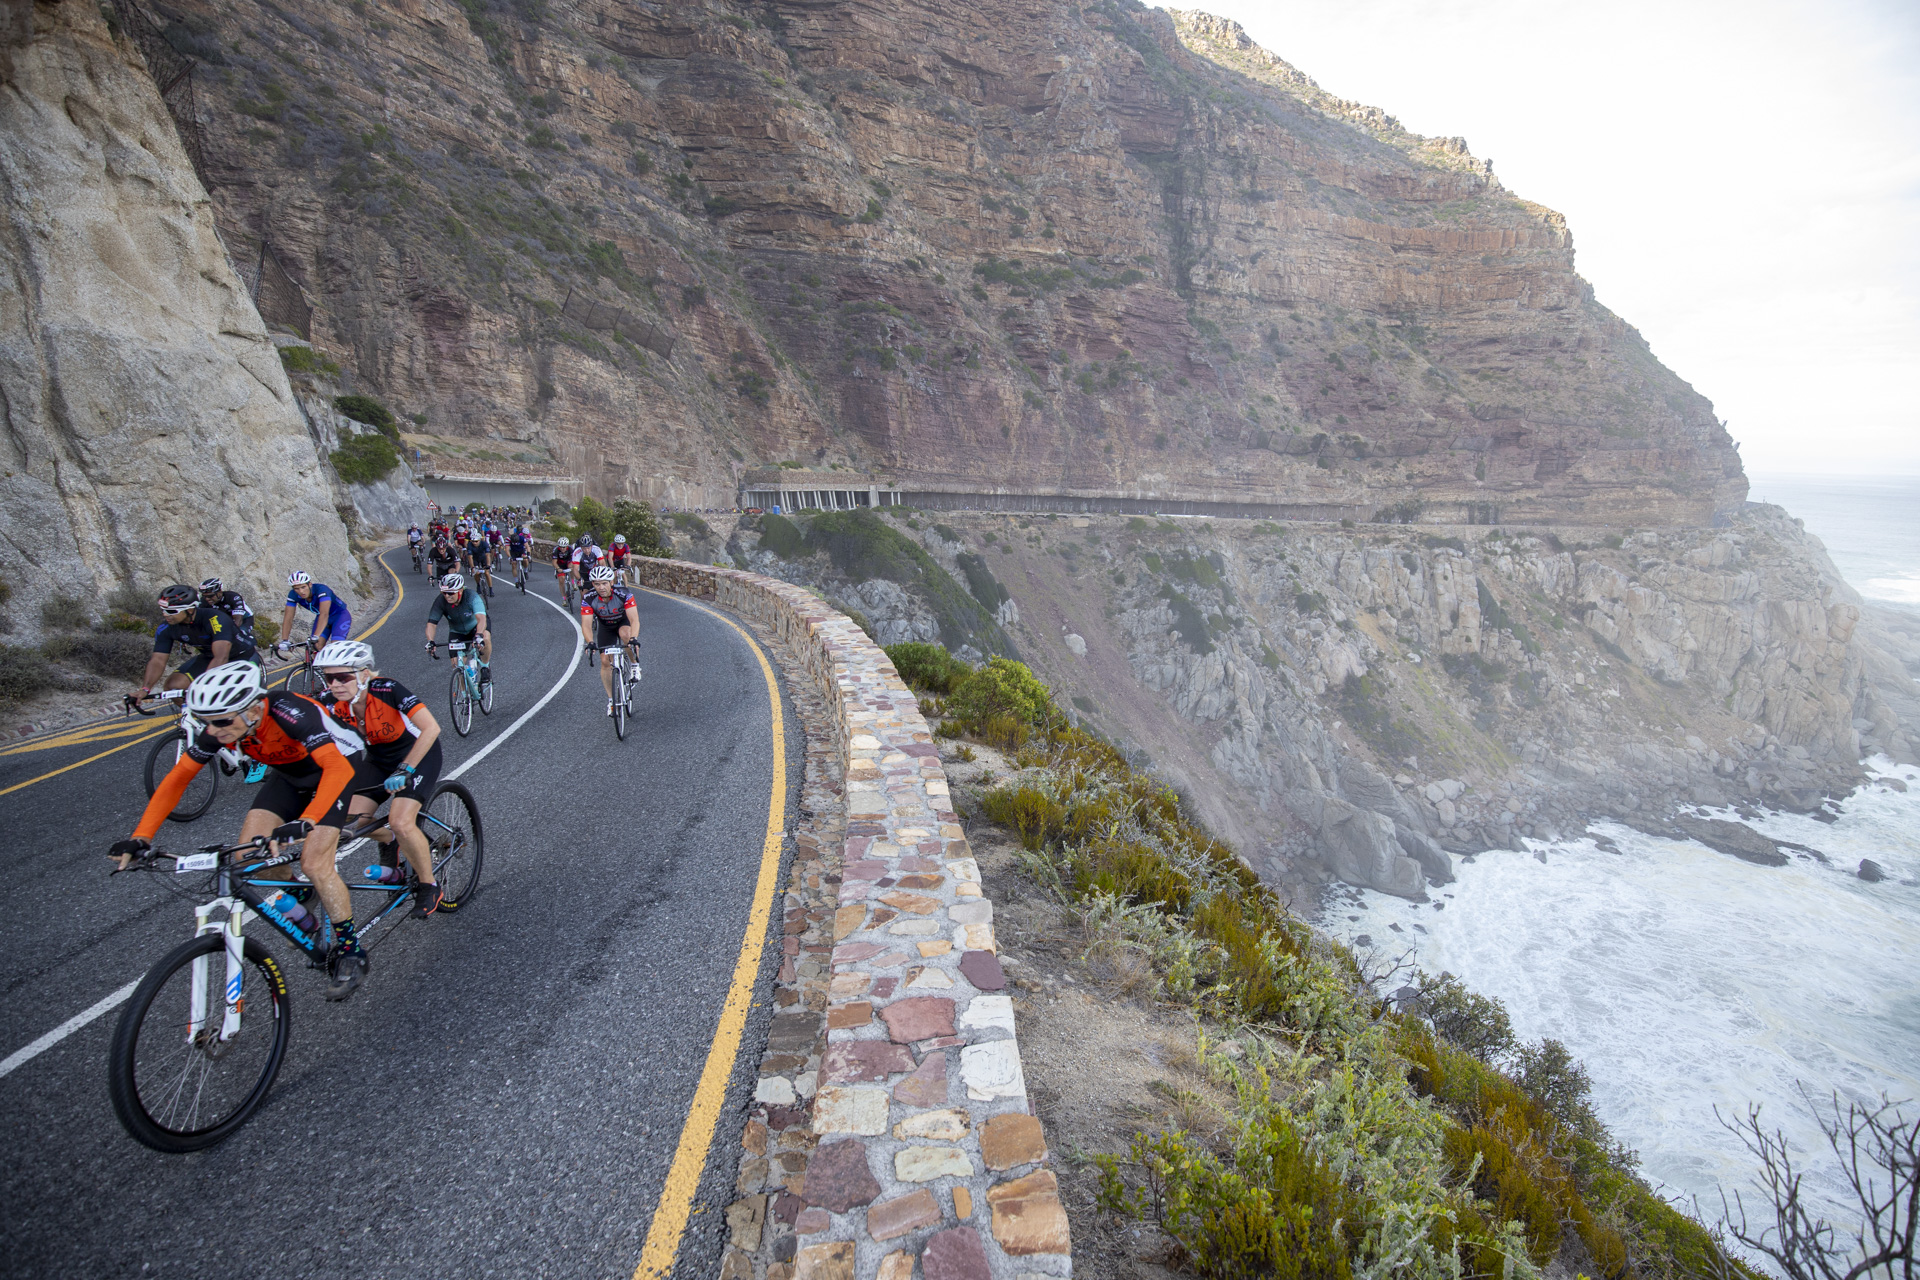 cape town cycle tour cancelled due to strong wind